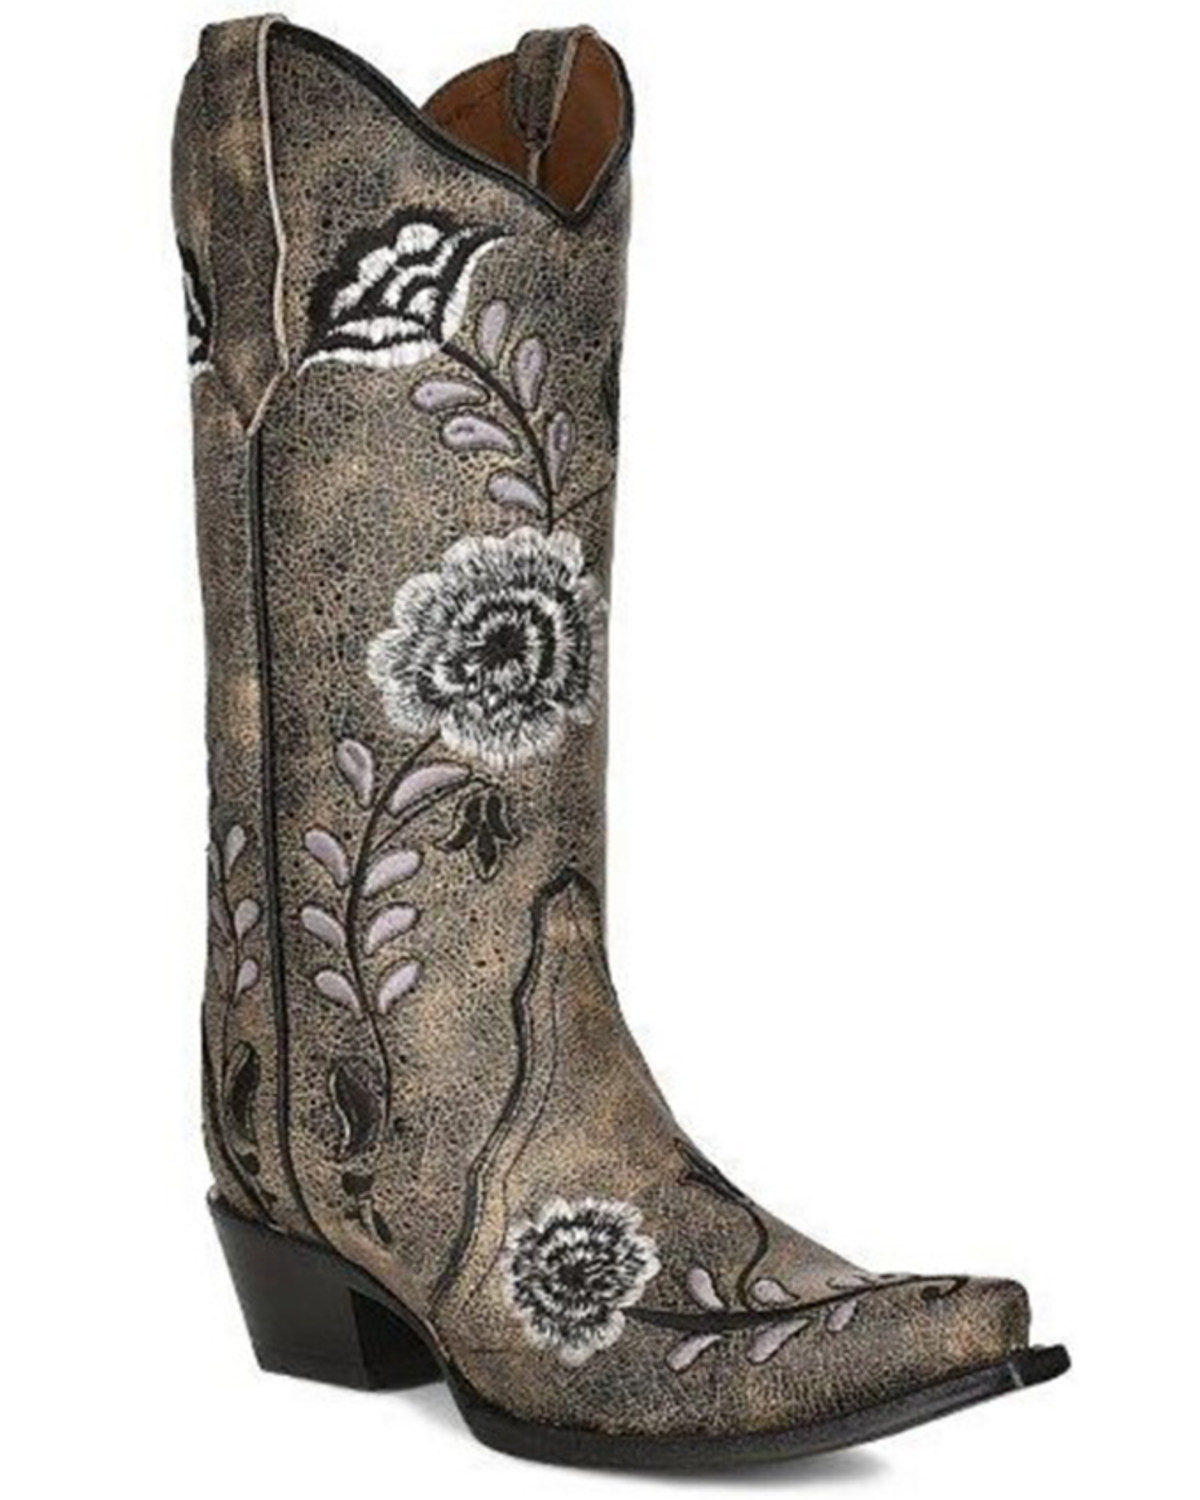 Corral Women's Floral Embroidered Western Boots - Snip Toe